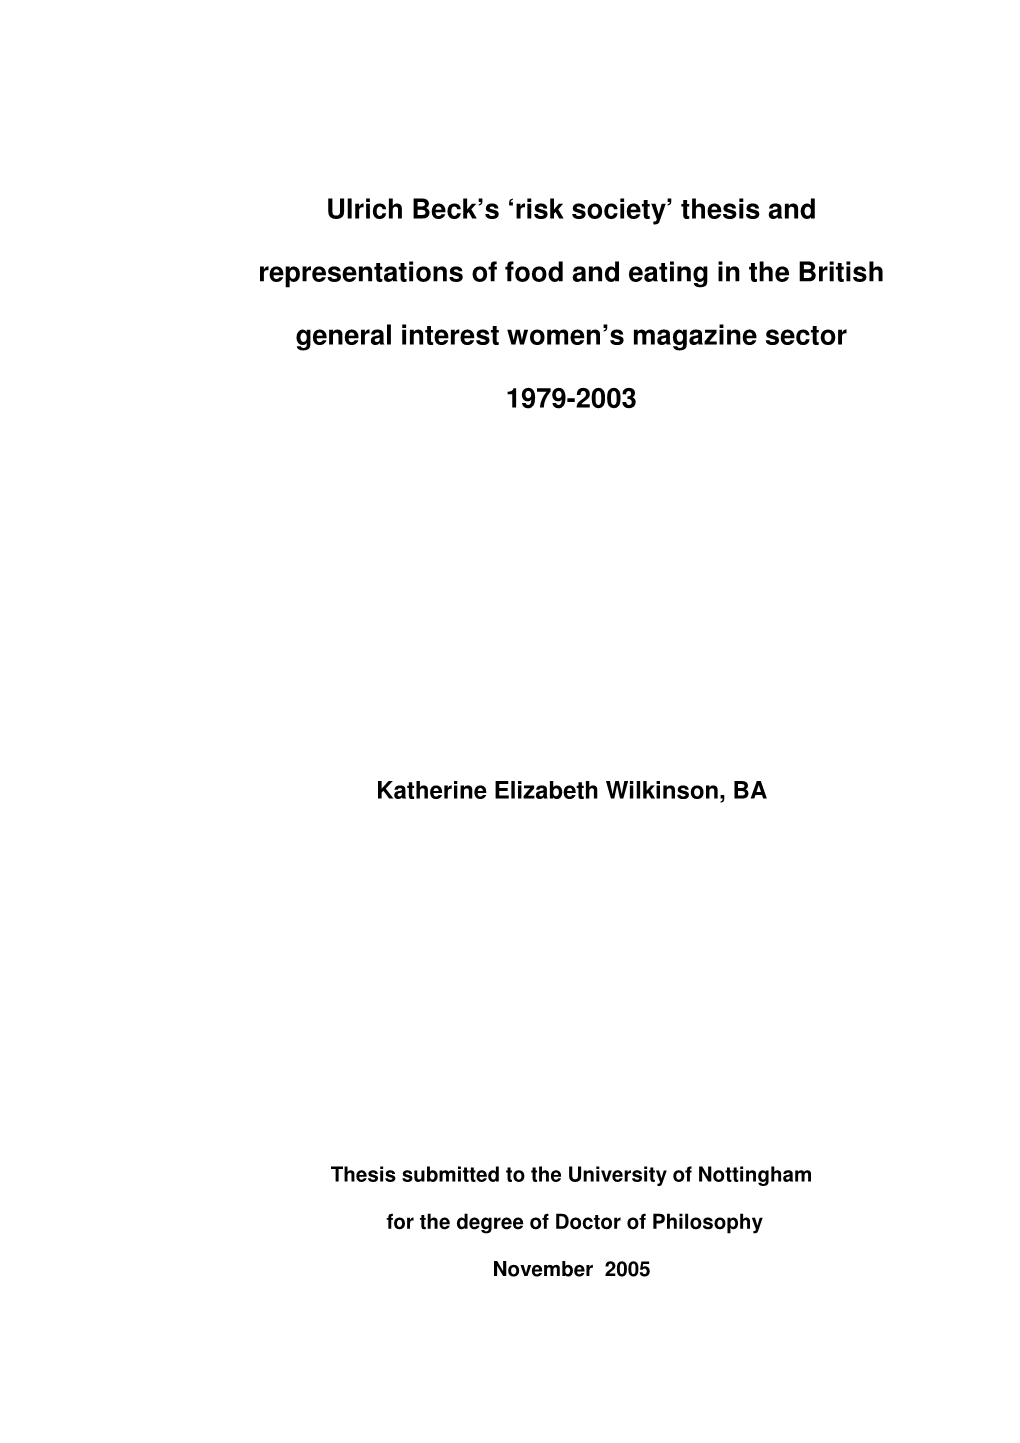 Ulrich Beck's 'Risk Society' Thesis and Representations of Food and Eating